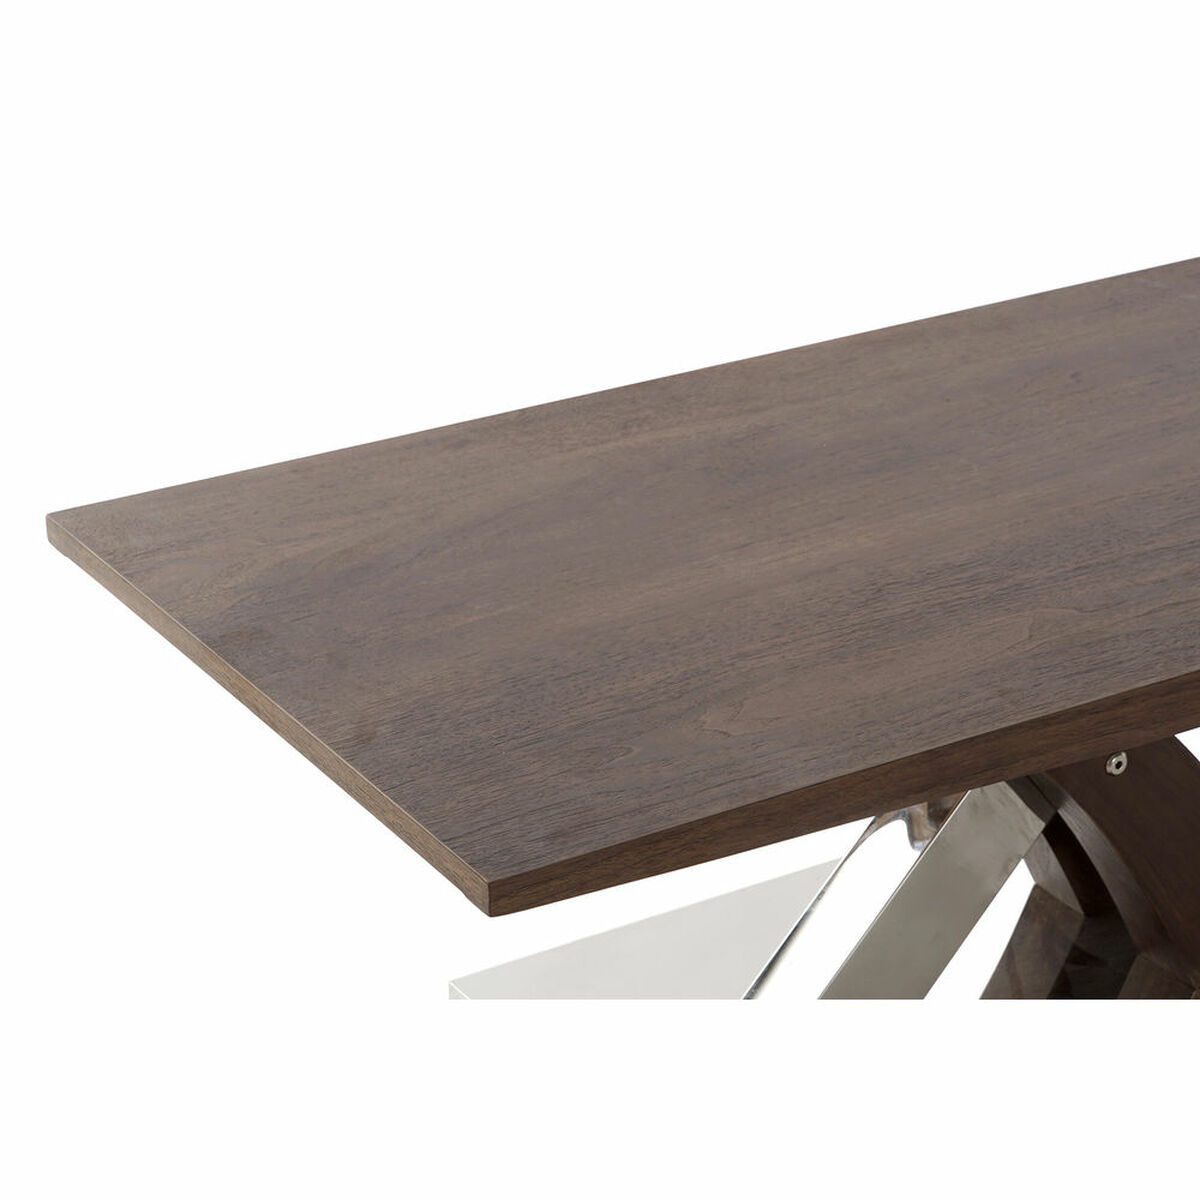 Dining Table DKD Home Decor Wood Steel (120 x 60 x 43.5 cm)